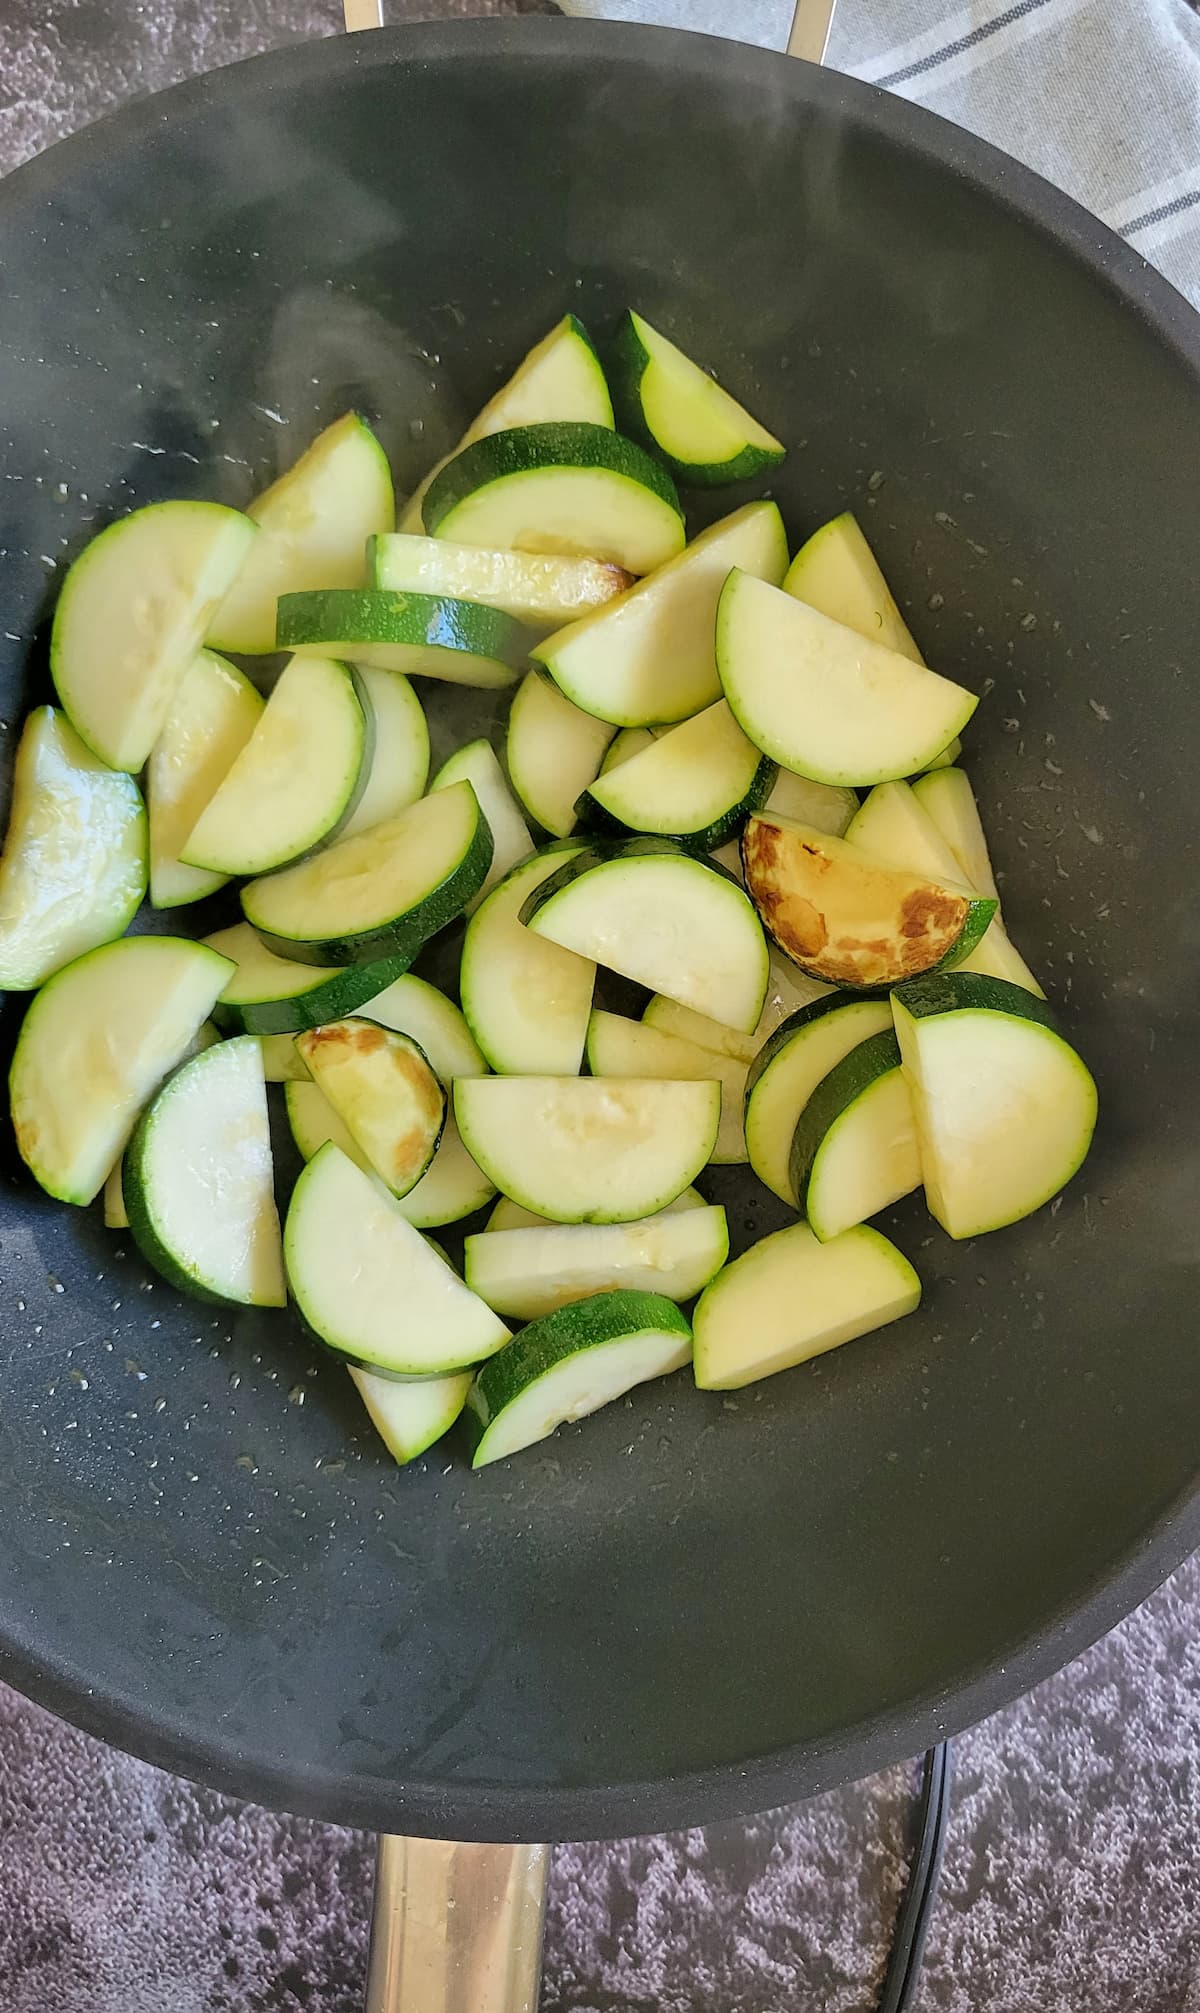 half moon zucchini slices cooking in a wok